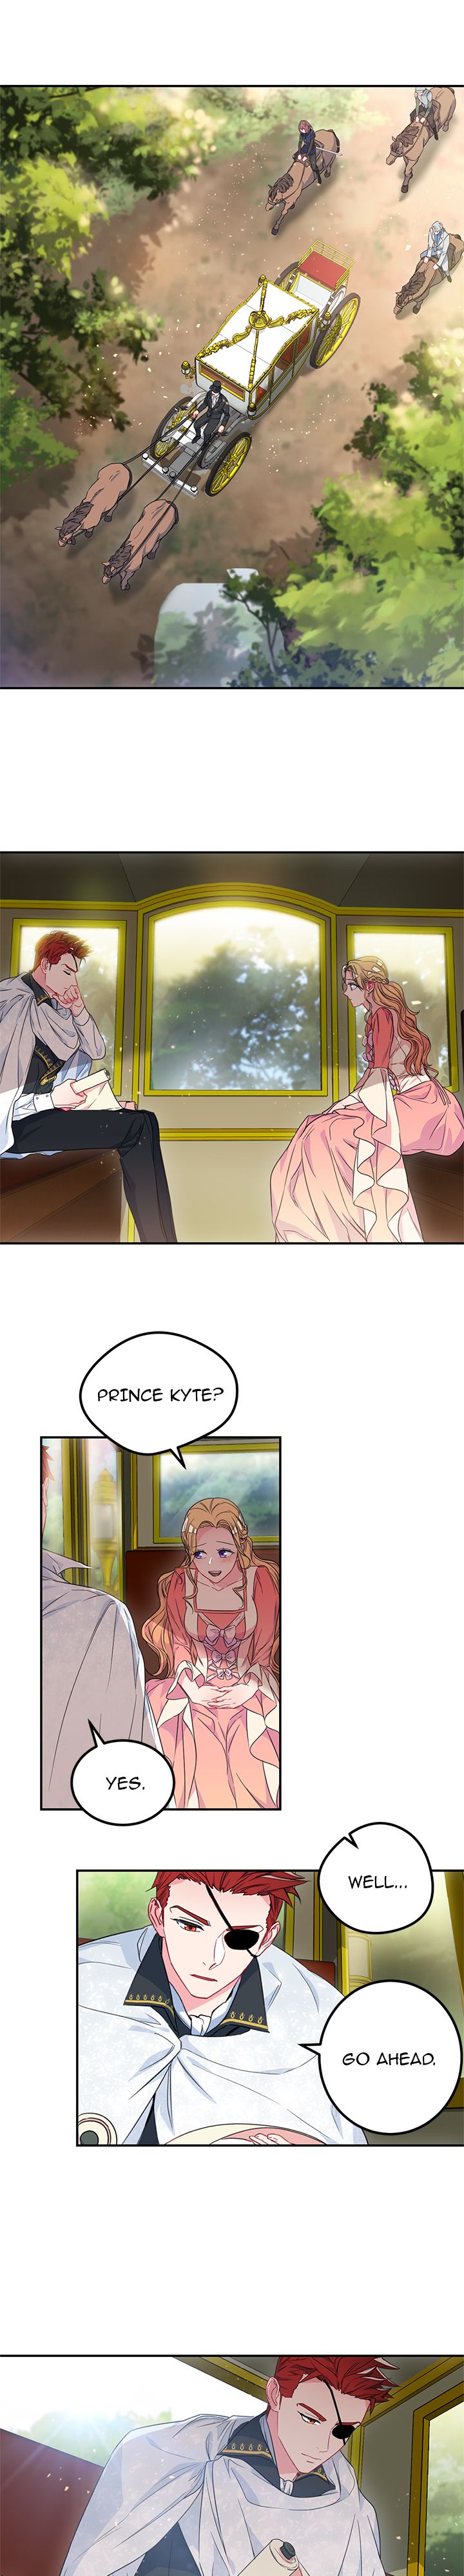 As You Wish, Prince Ch.24